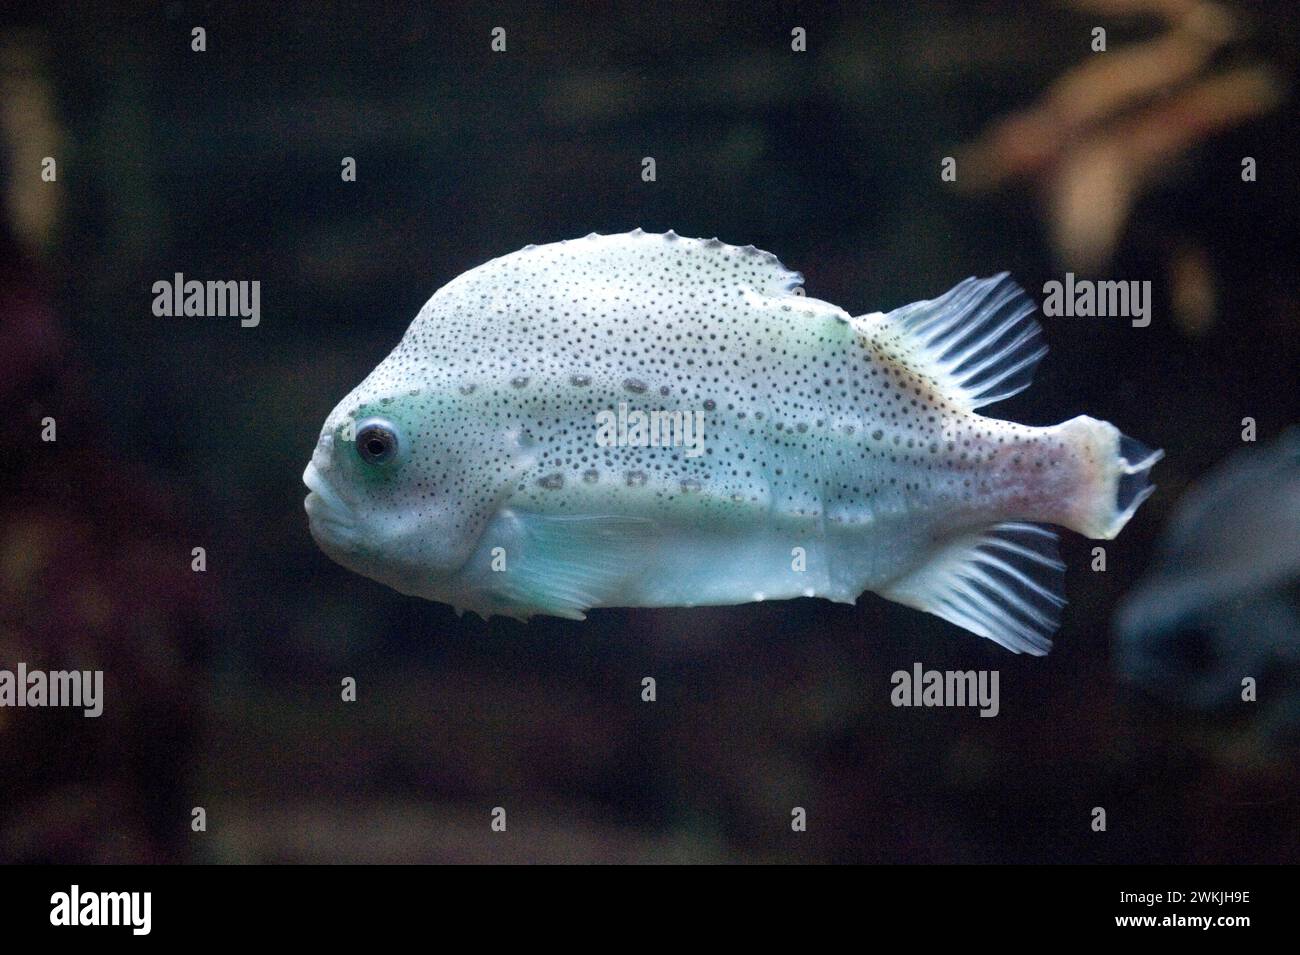 Lumpfish (Cyclopterus lumpus) is a marine fish native to North Altantic Ocean. Is fished for its edible roe. Stock Photo